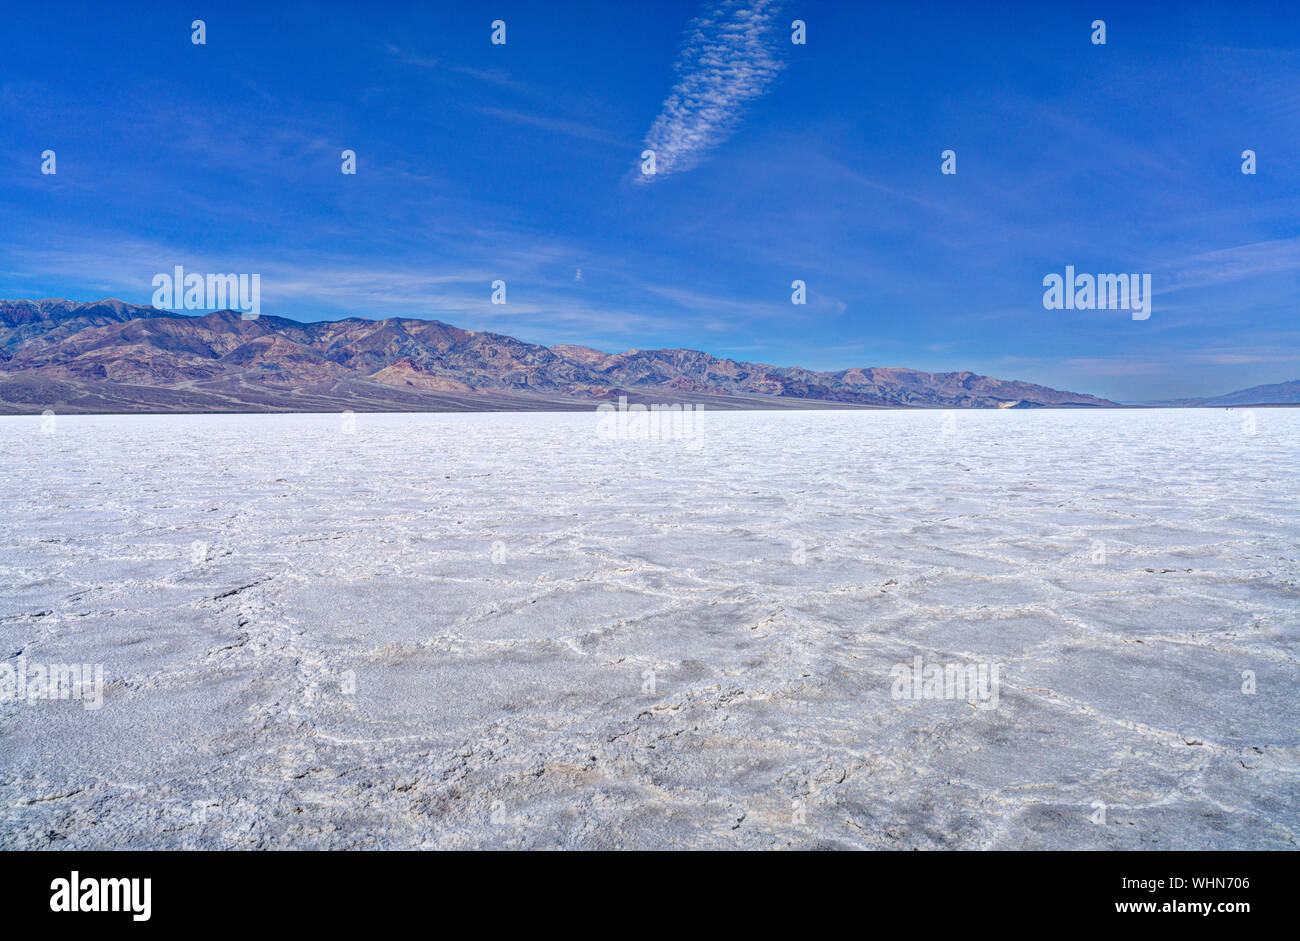 View Of Badwater Basin At Death Valley National Park Against Blue Sky Stock Photo